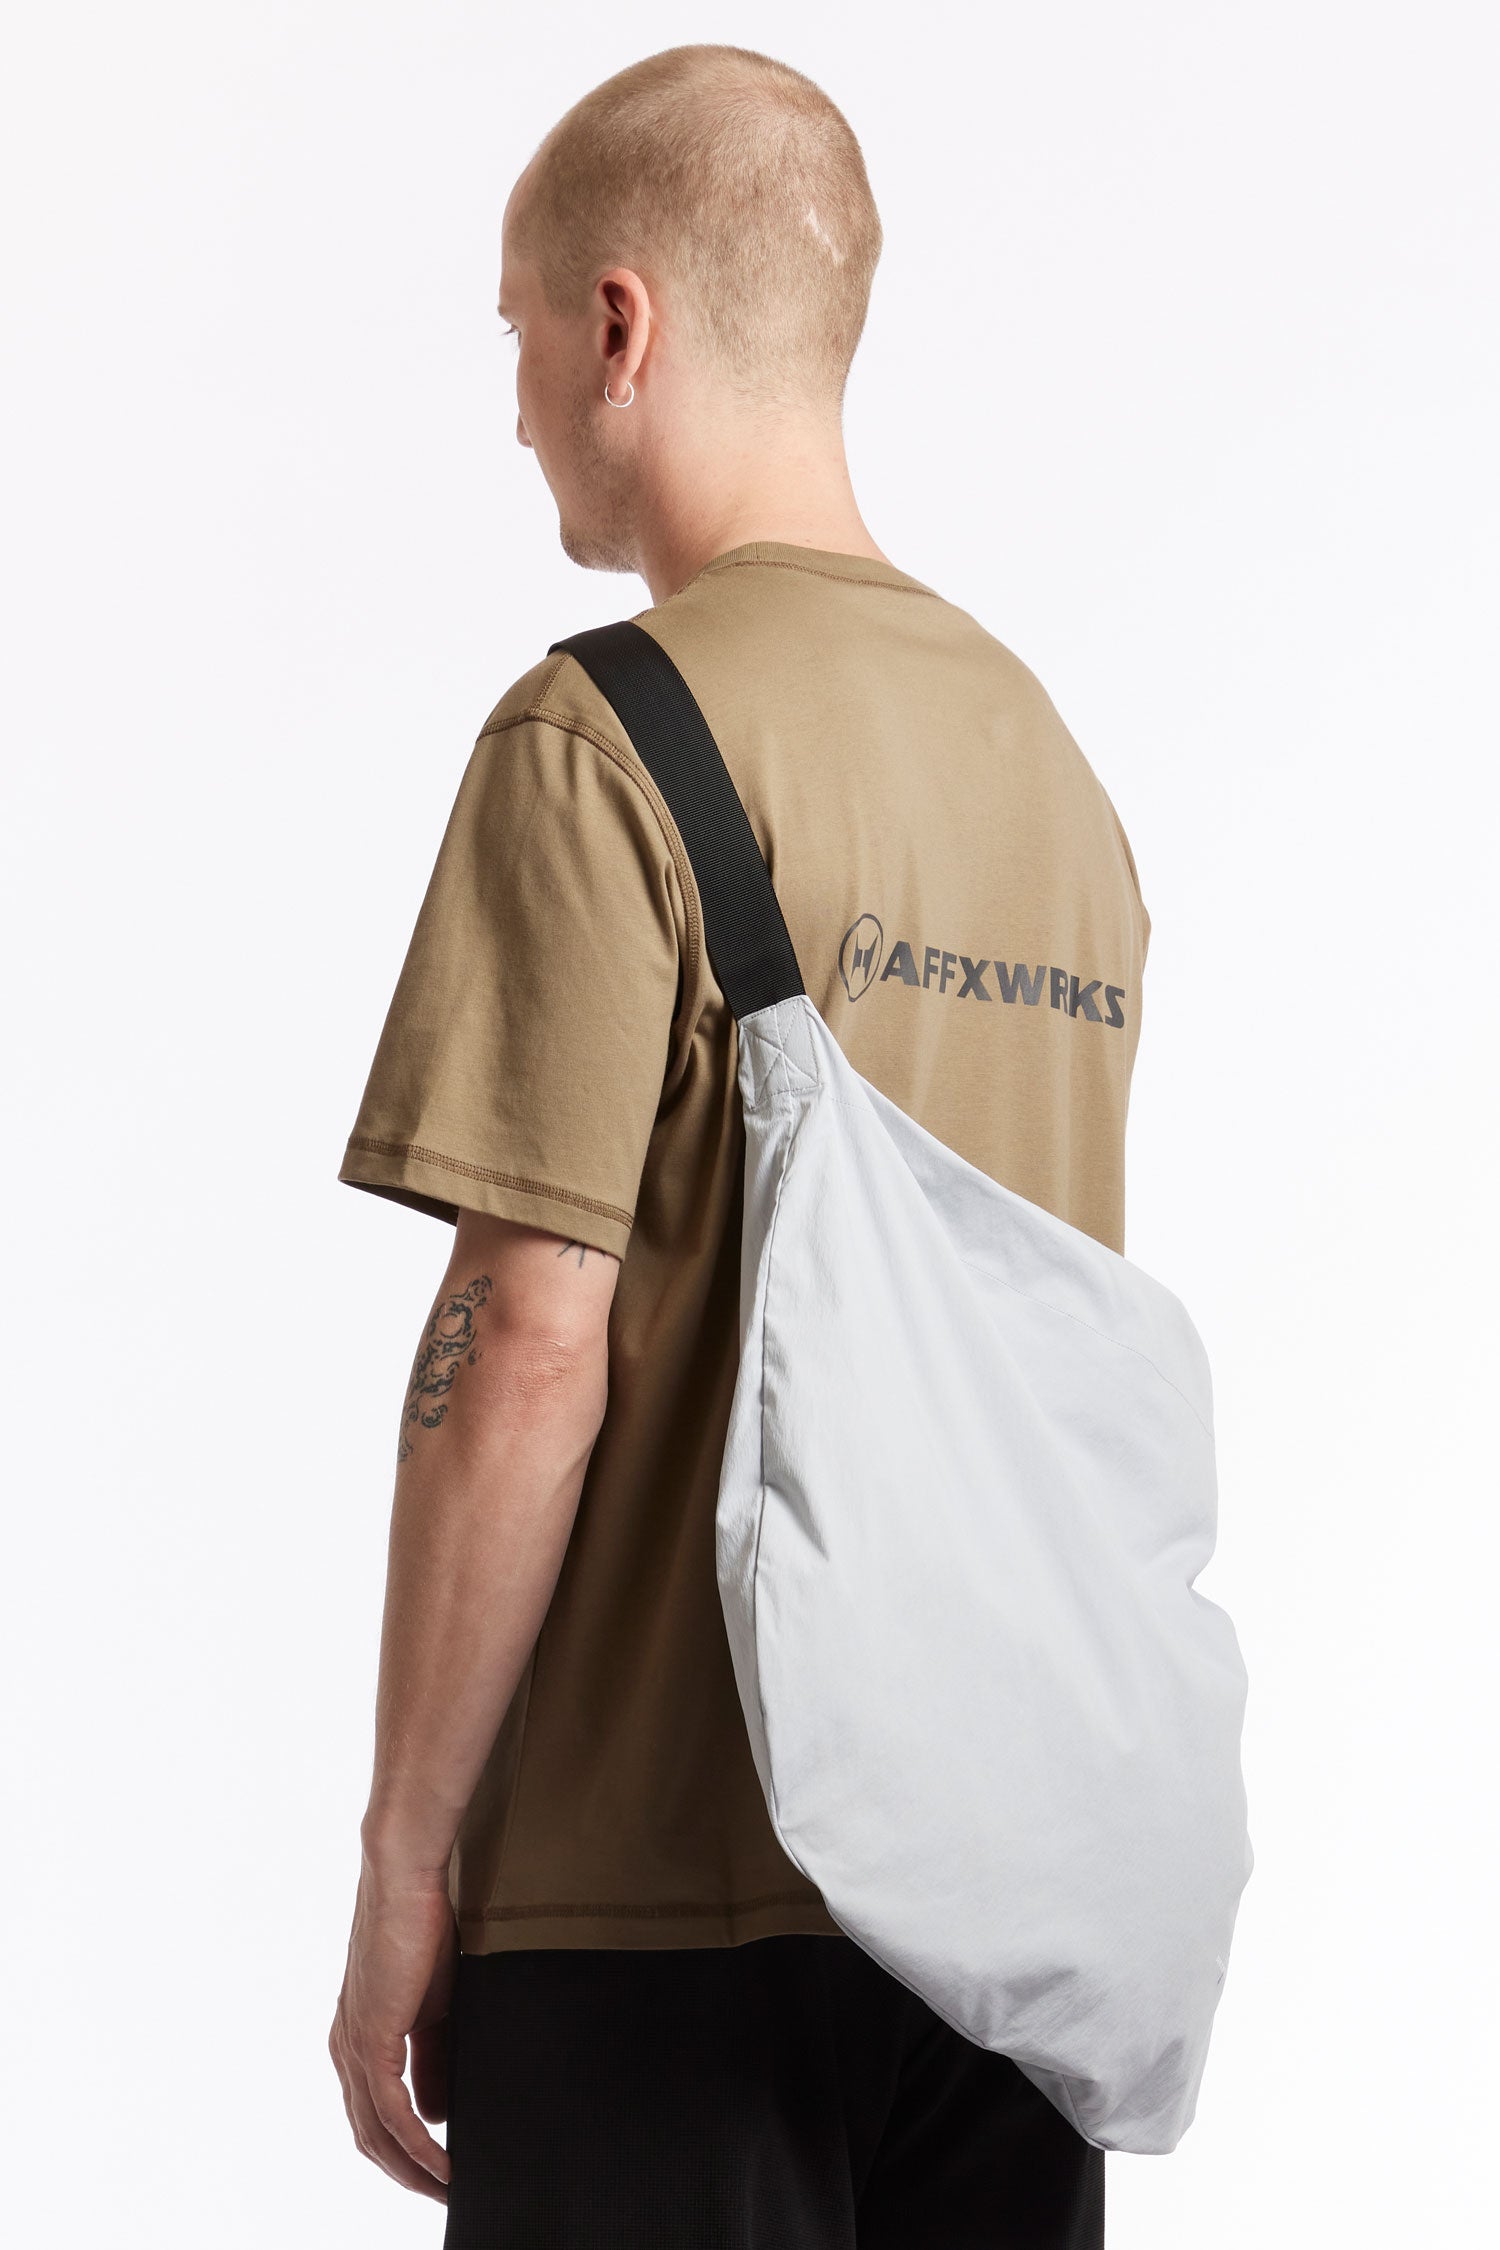 The AFFXWRKS - G-HOOK BAG MINERAL GREY available online with global shipping, and in PAM Stores Melbourne and Sydney.